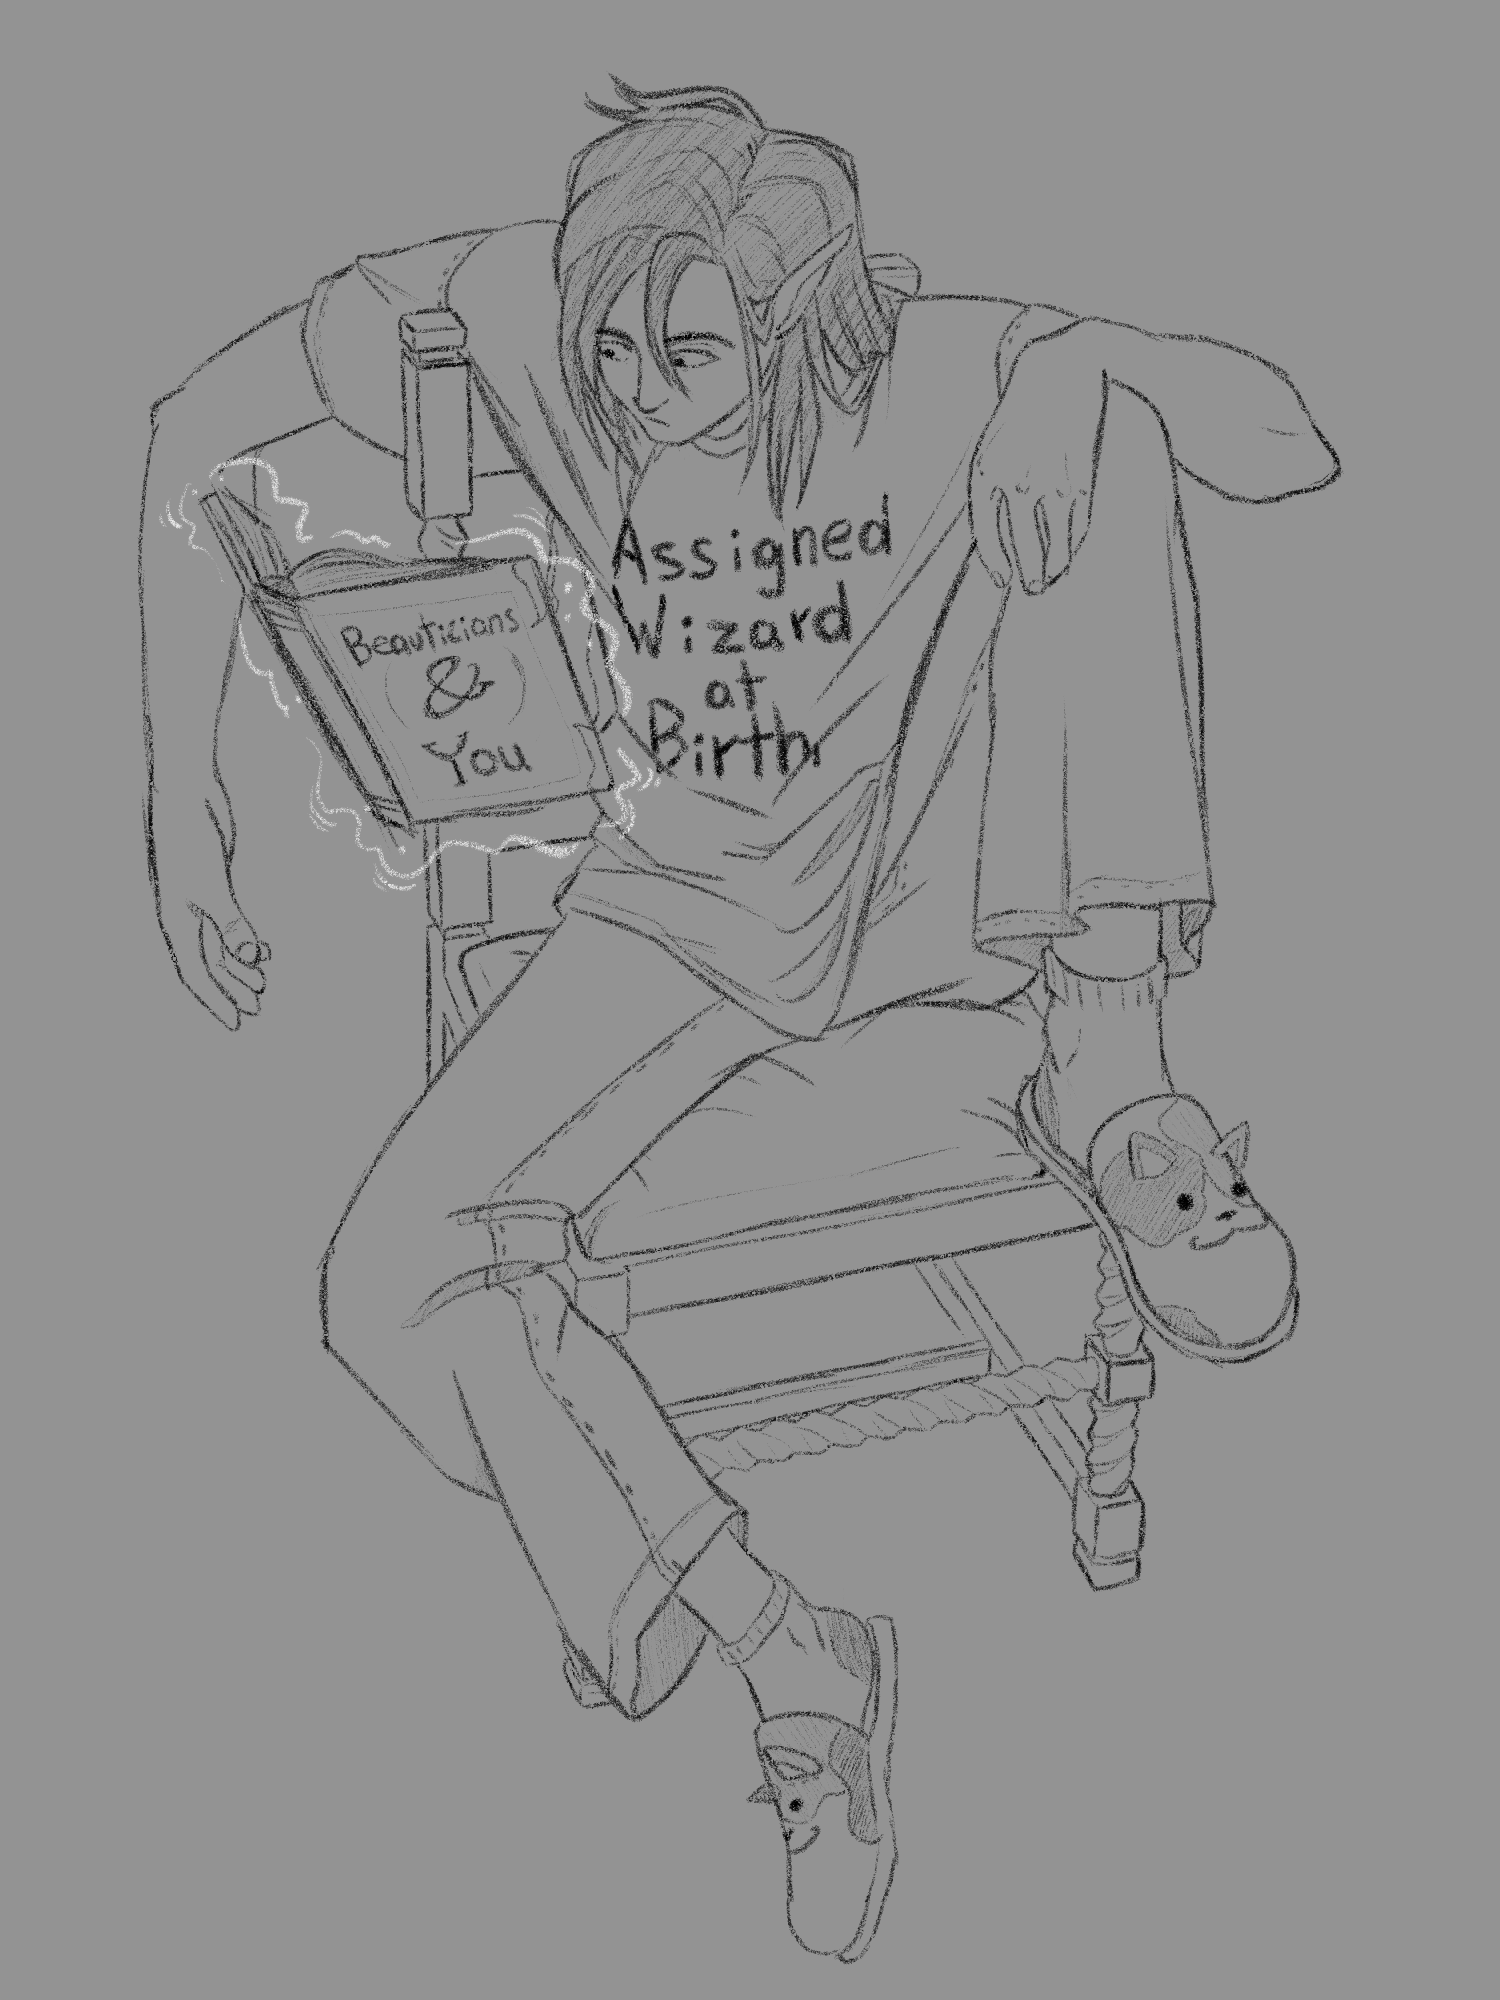 A monochrome sketch of Zelphar, an elf, sitting in a chair in an exaggerated pose. He's wearing a baggy shirt that says 'Assigned Wizard at Birth,' pajama pants, and calico cat slippers. He's reading a book magically levitating in front of him titled, 'Beauticians & You.'